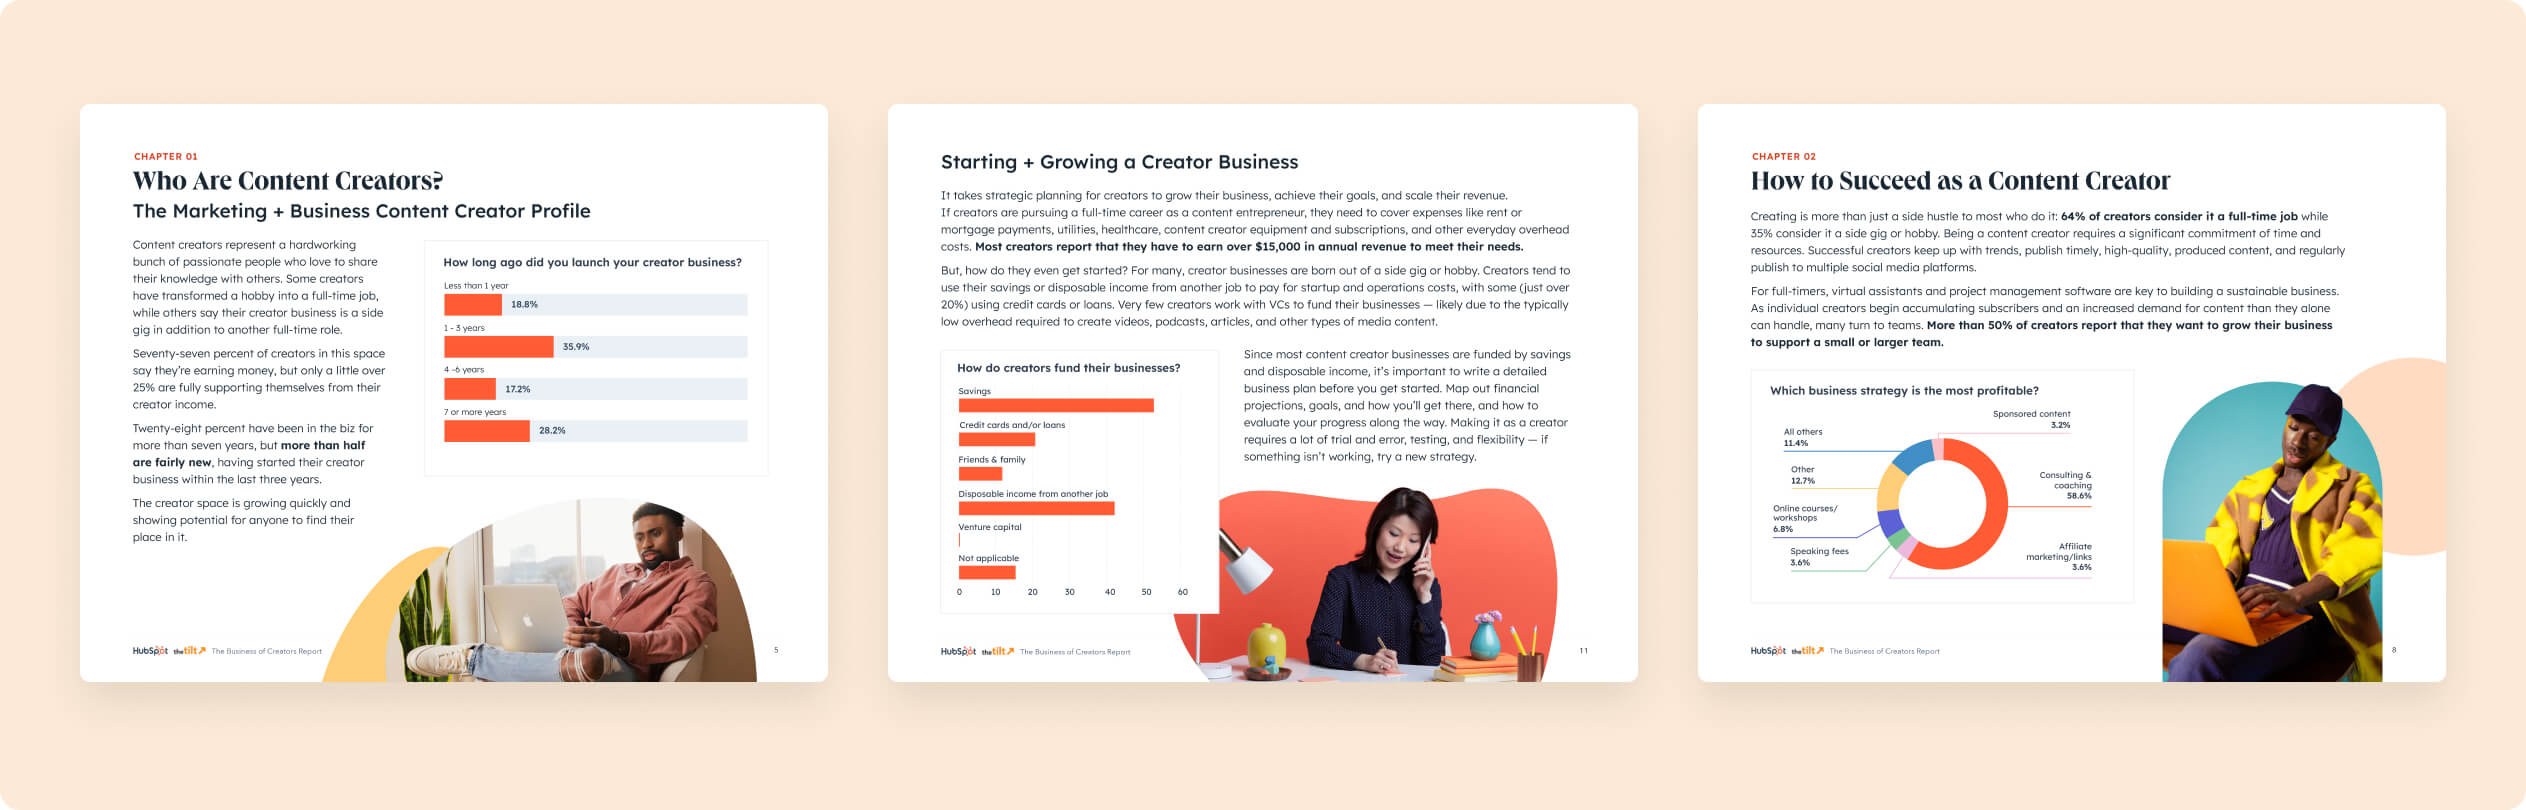 Three interior pages of the HubSpot Business of Creators report